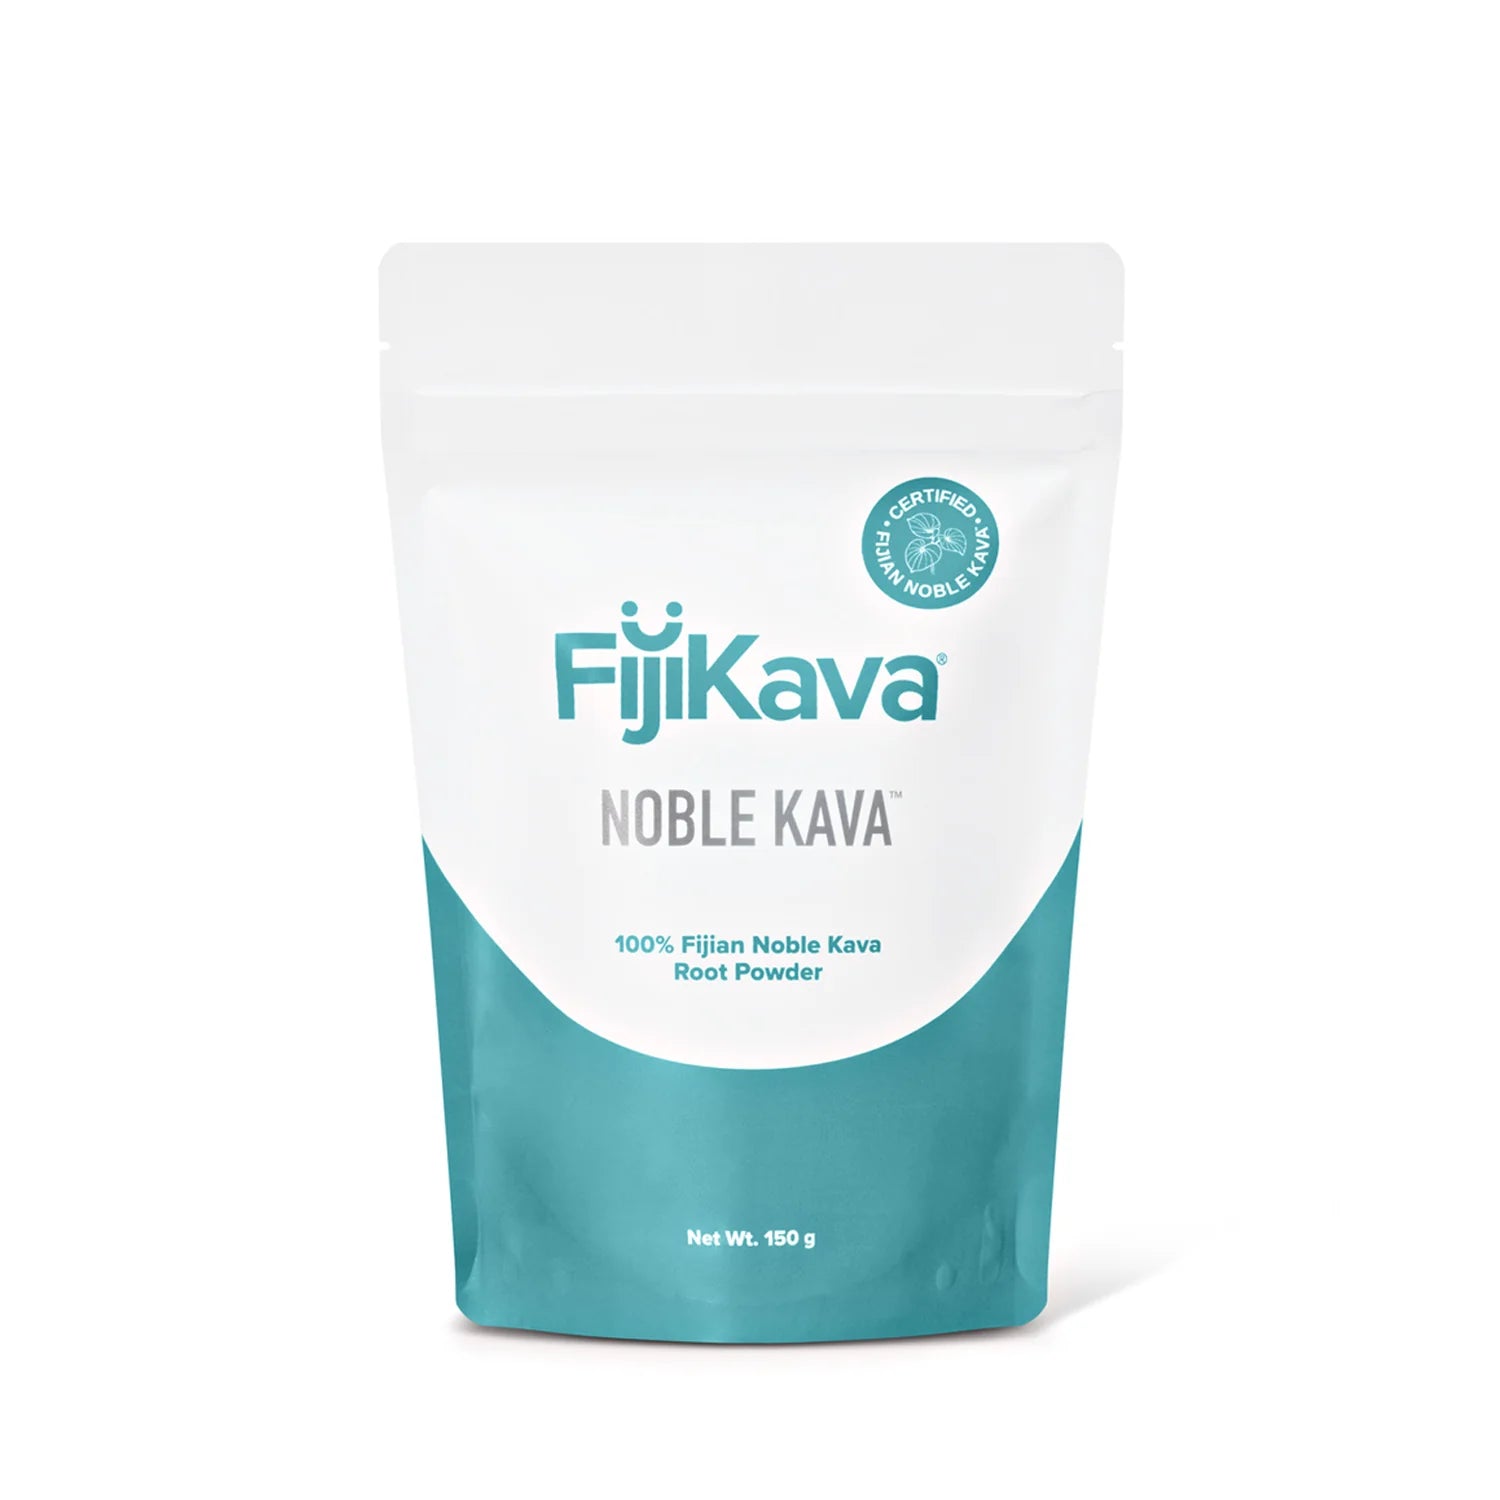 BUY TWO 150g Packs GET ONE FREE + KAVA DRINKING CUP!